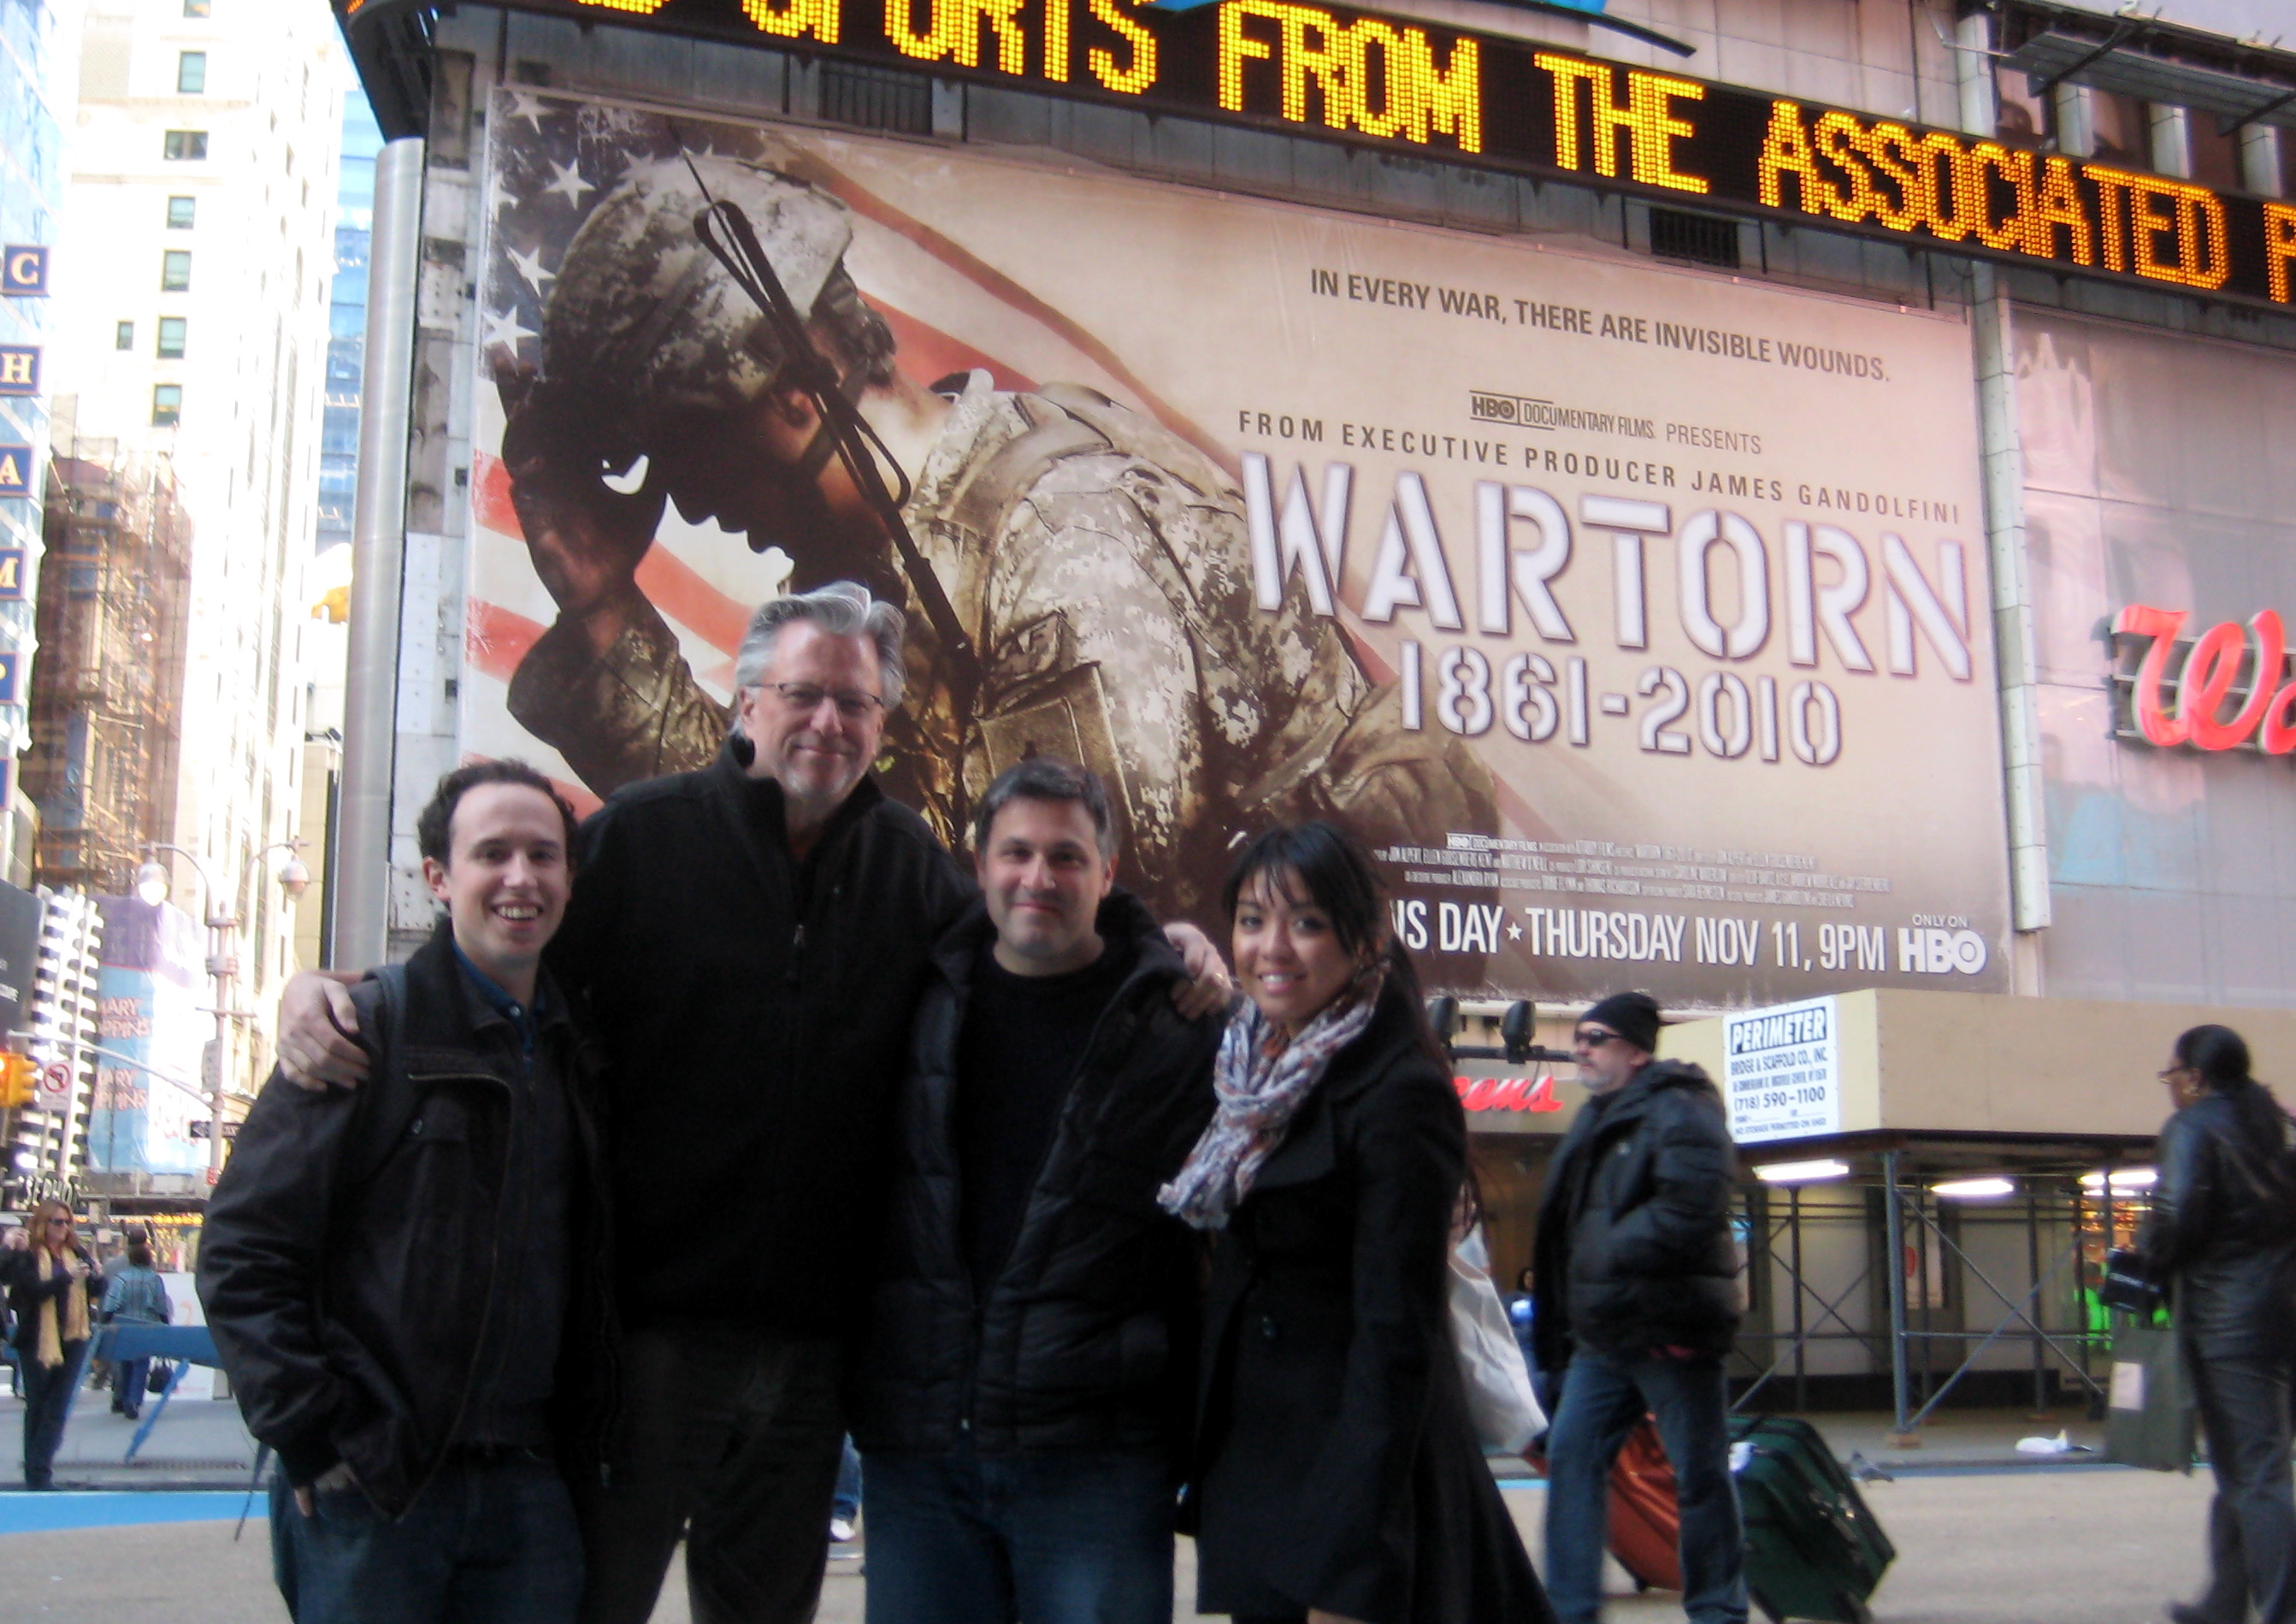 Jay Sterrenberg,Geof Bartz, Andy Morreale,Gladys Murphy in front of WARTORN poster in Times Square, November 2010